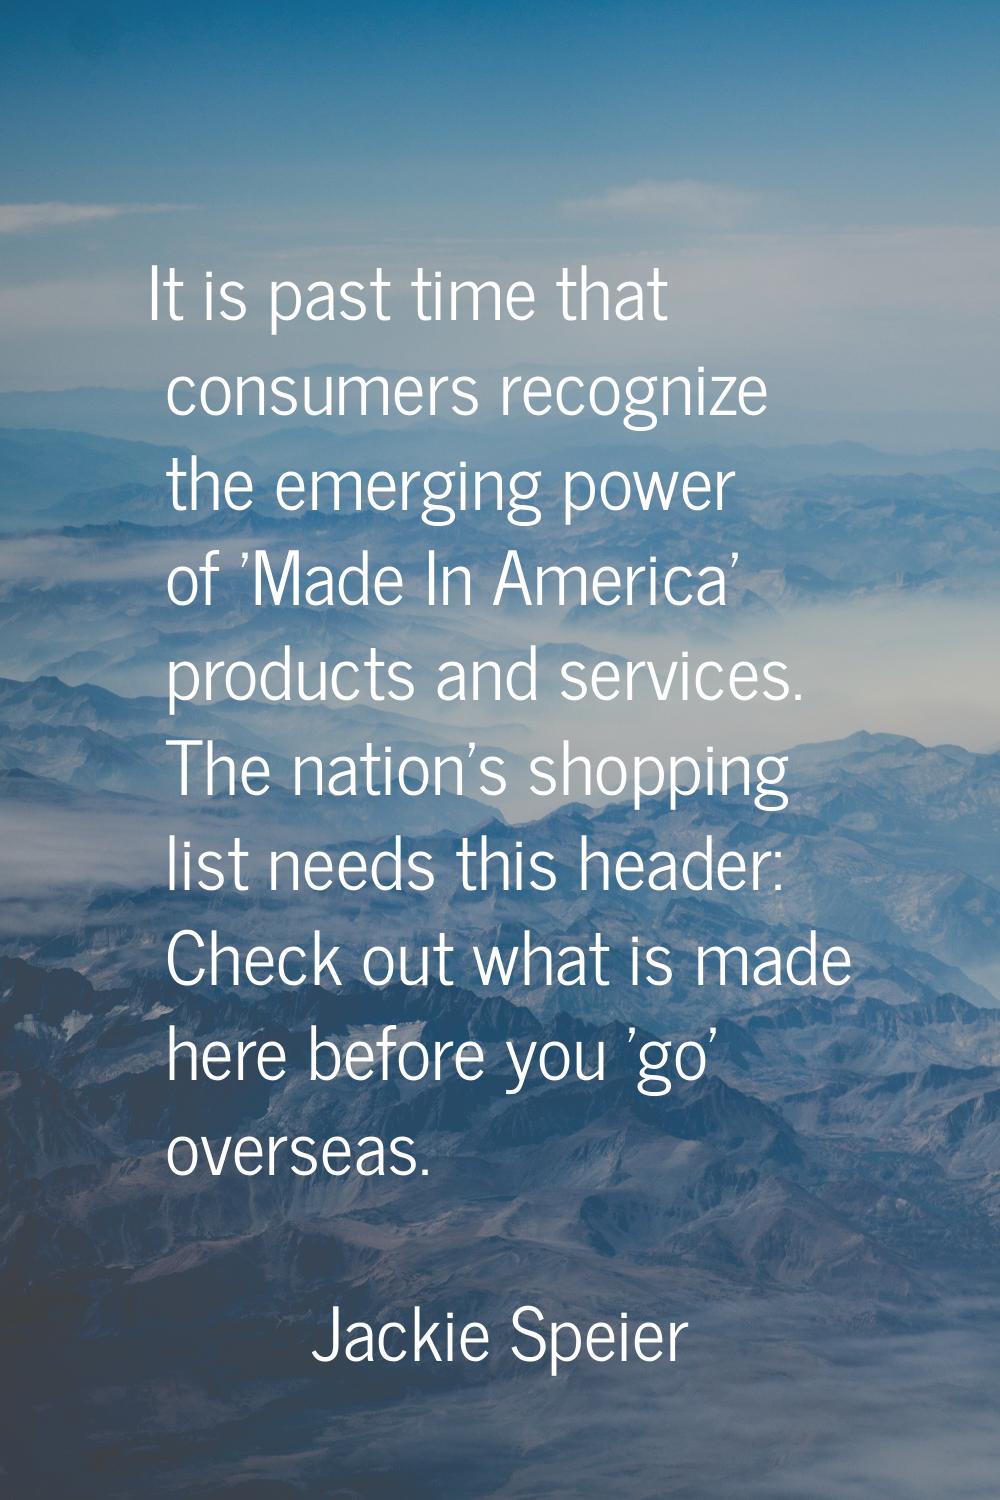 It is past time that consumers recognize the emerging power of 'Made In America' products and servi